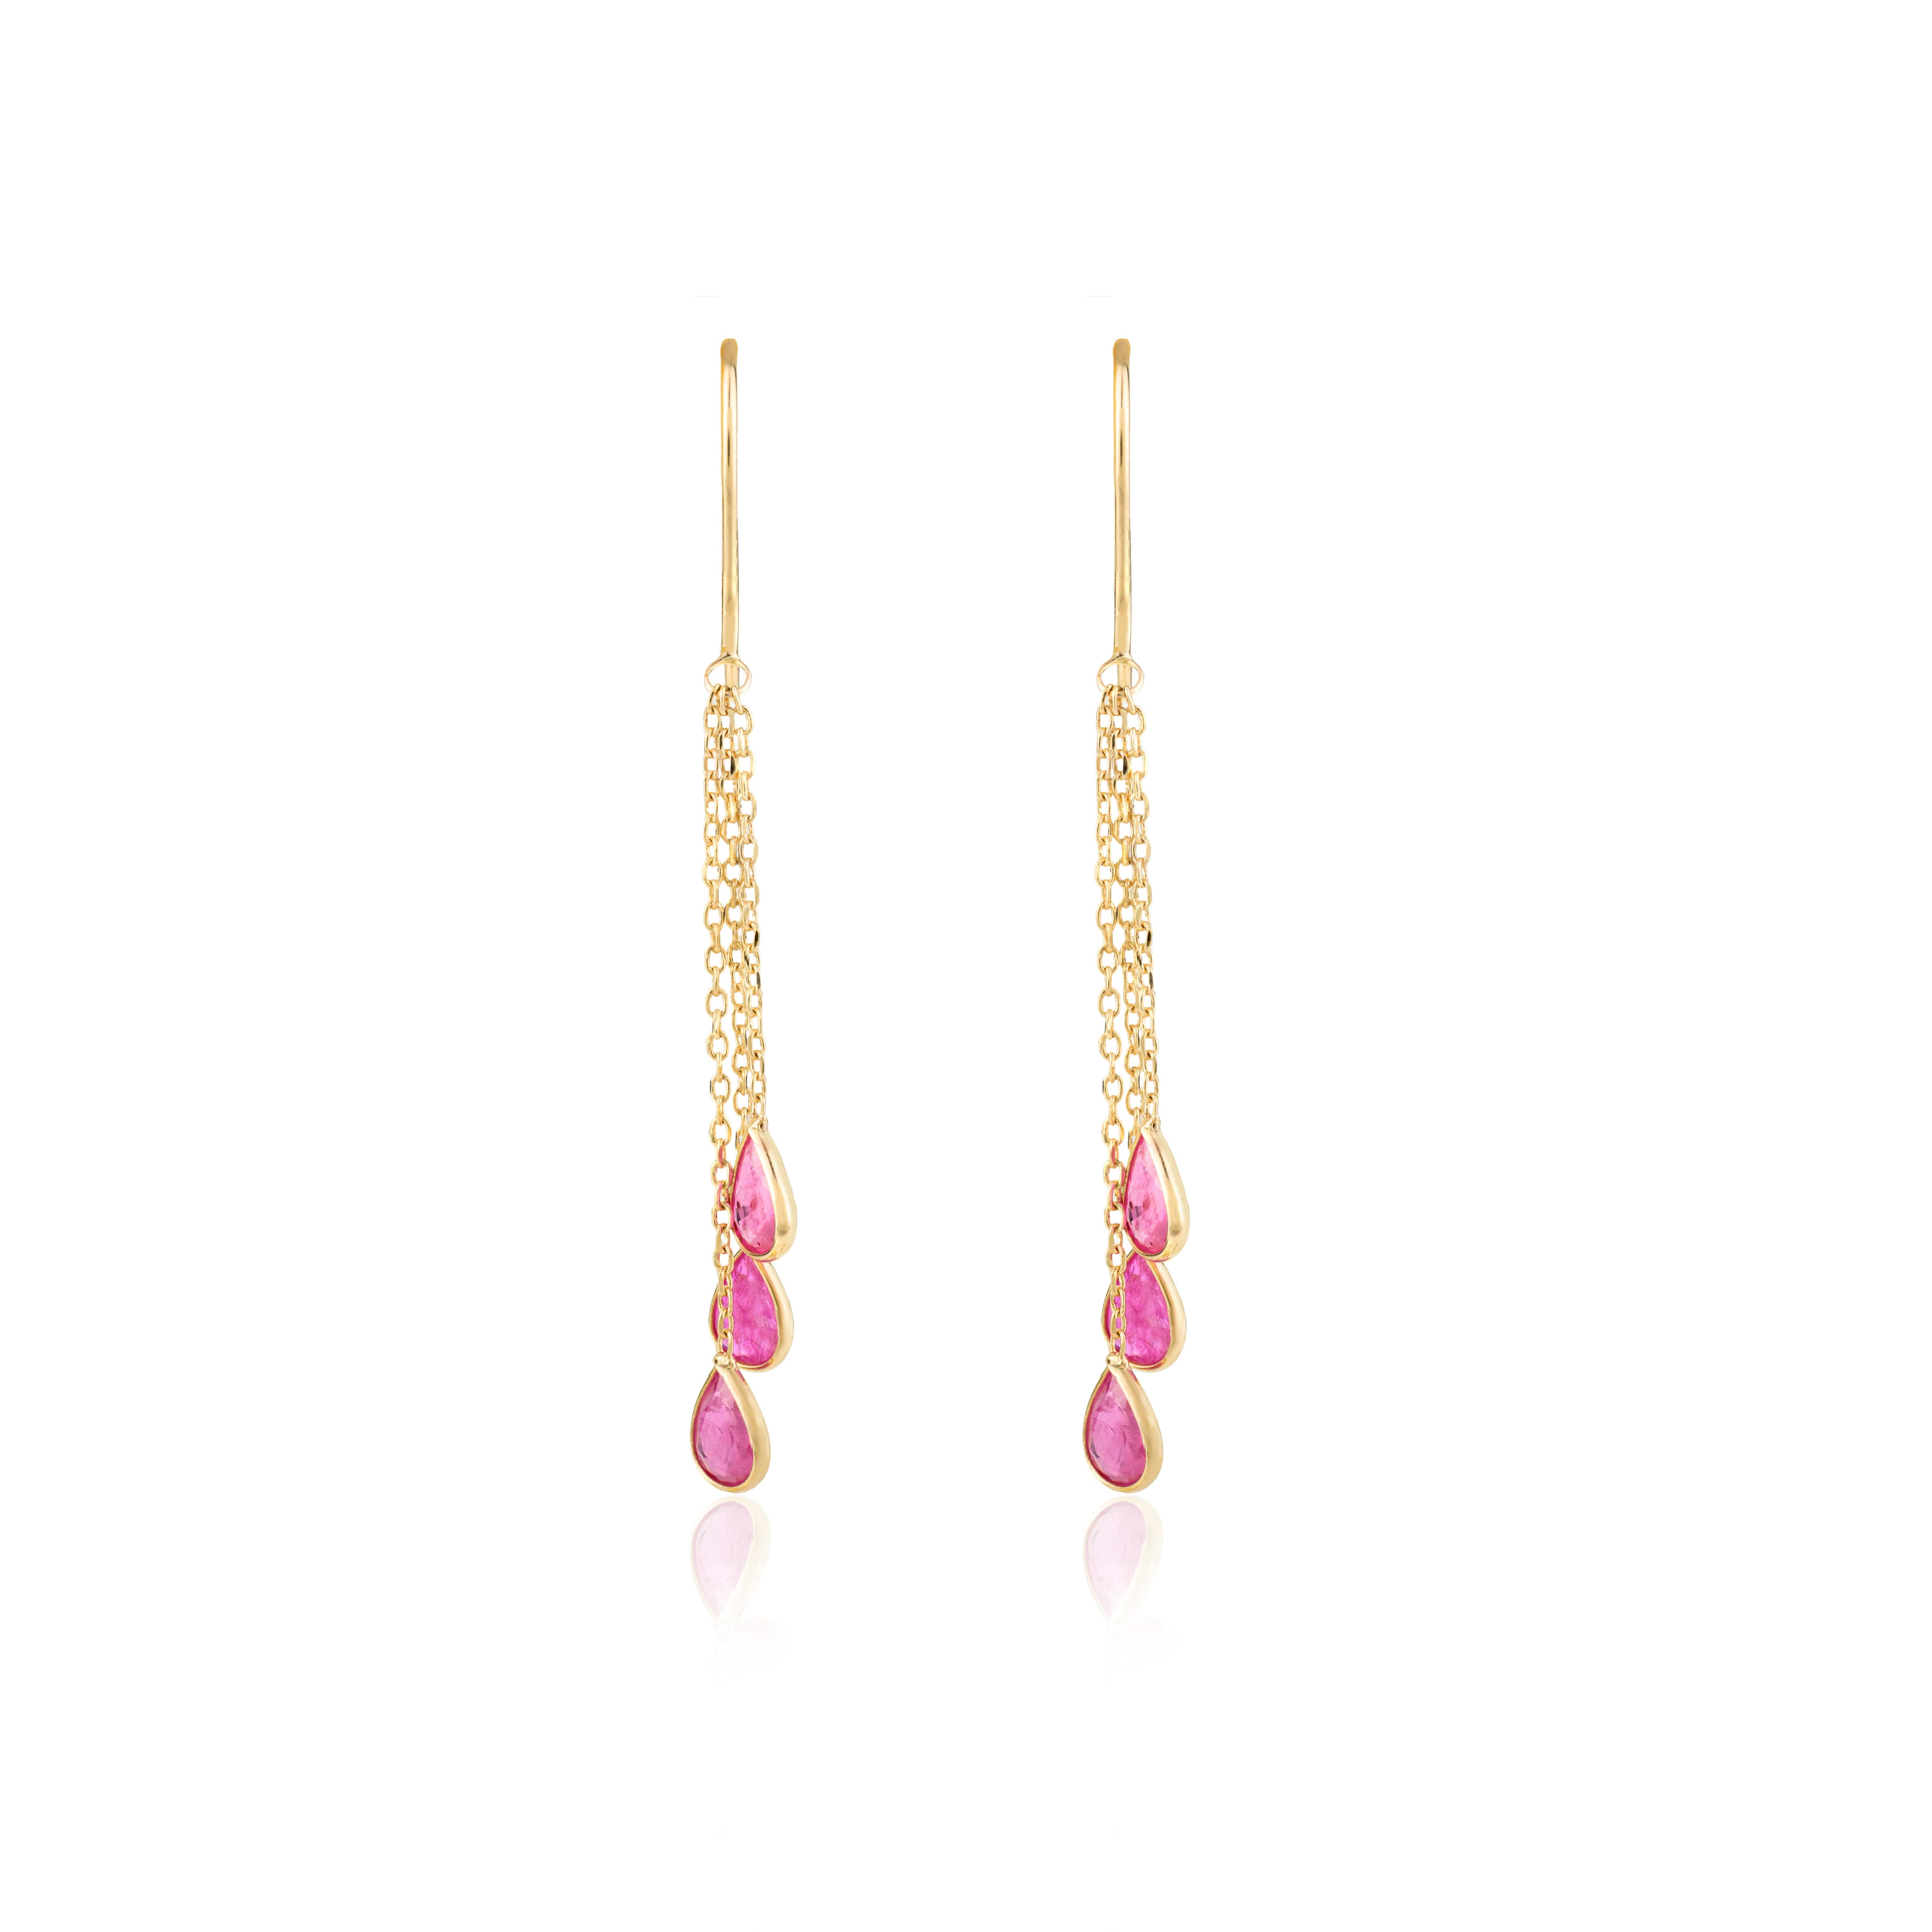 Modern Minimal 18k Solid Yellow Gold Ruby Multi Chain Drop Earrings Gift for Her For Sale